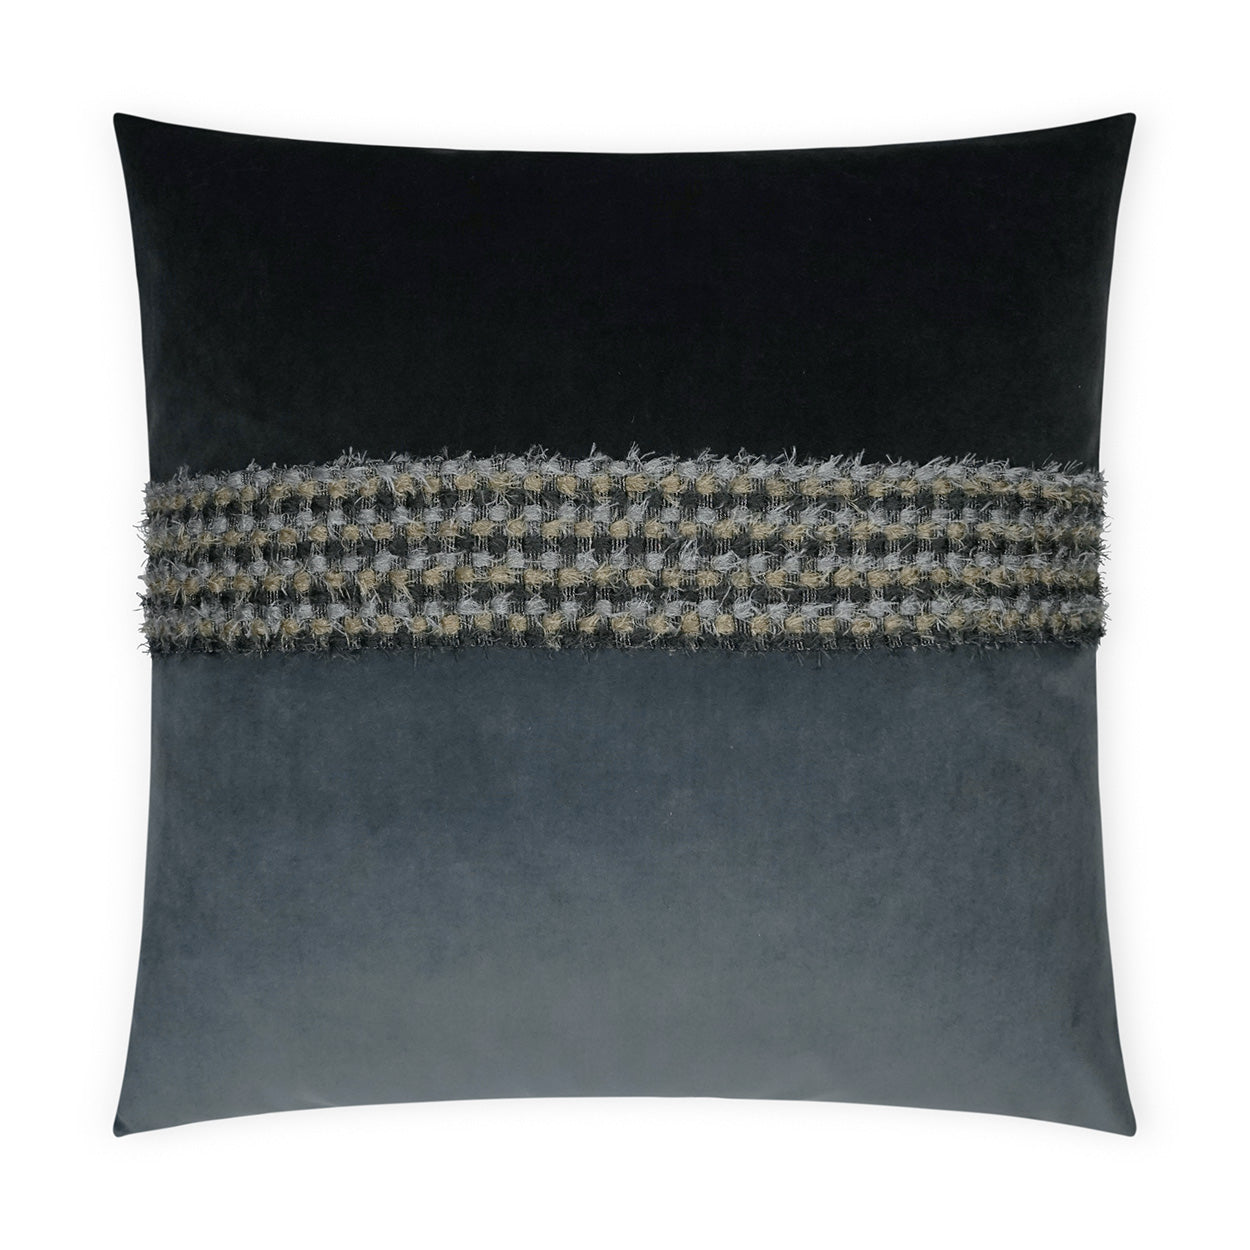 PILLOW GRAPHITE (Available in 2 Sizes)